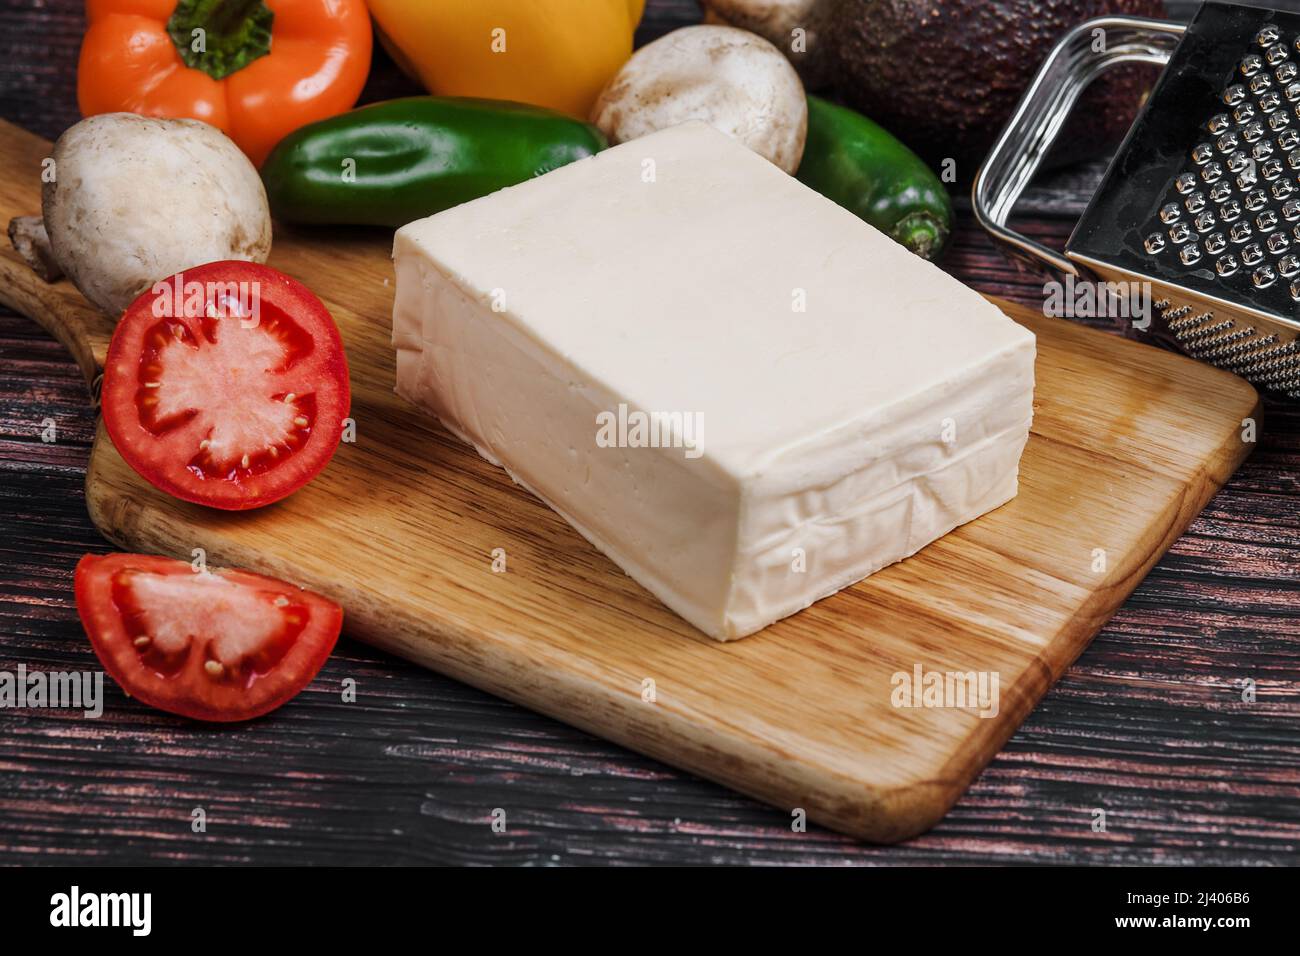 Mexican Chihuahua cheese or mennonite cheese and tequila or mezcal shot from Mexico Latin America Stock Photo